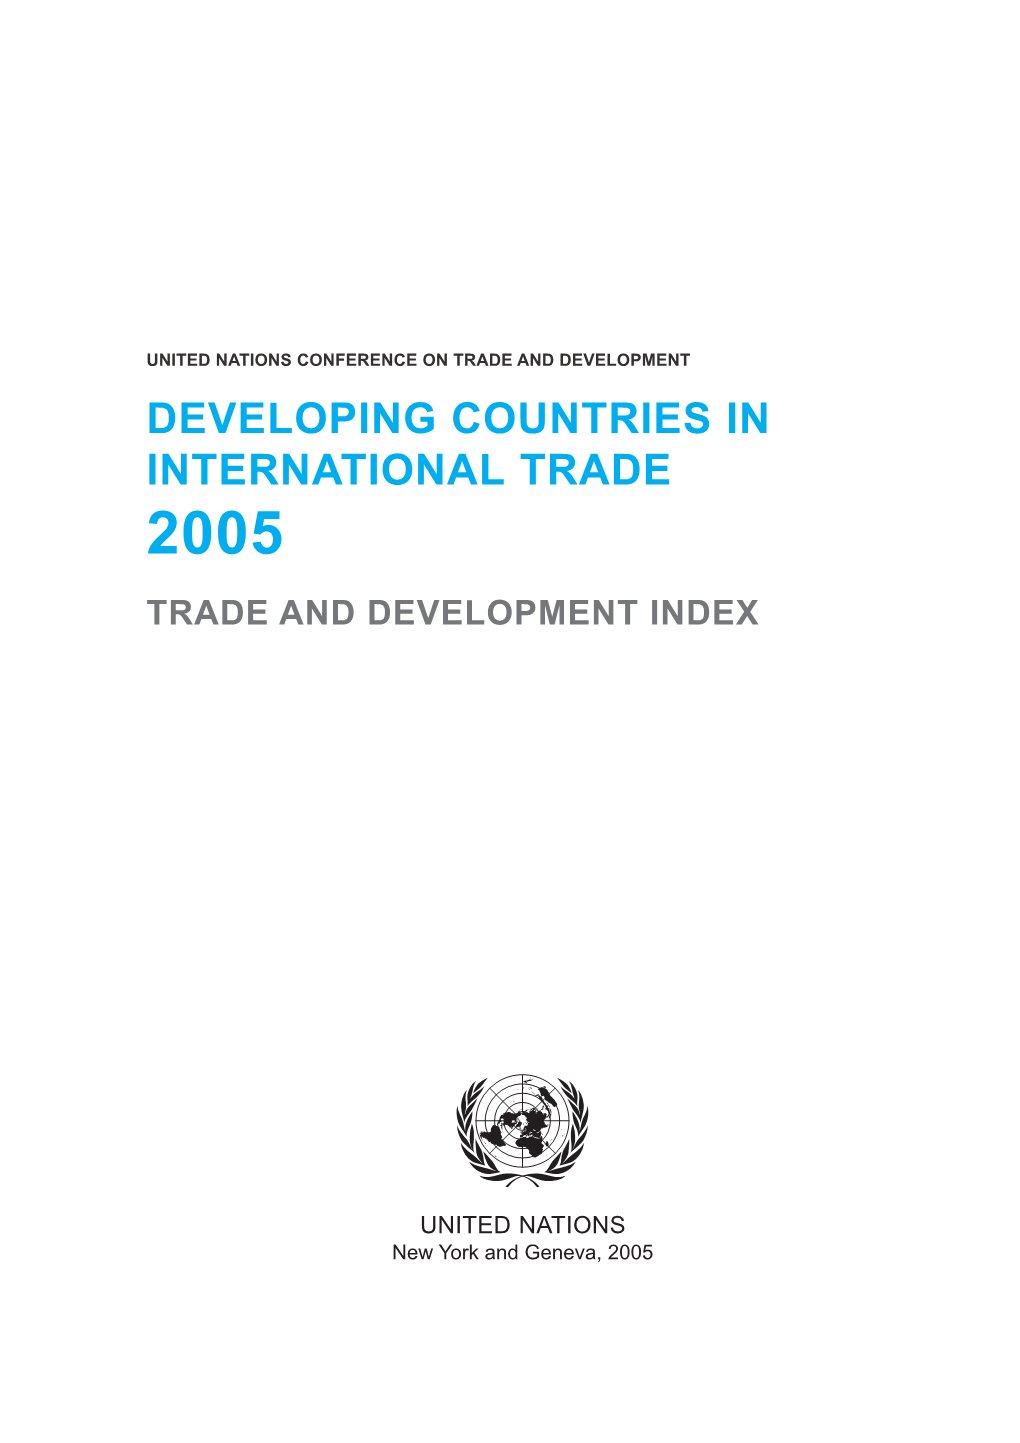 Developing Countries in International Trade 2005 Trade and Development Index